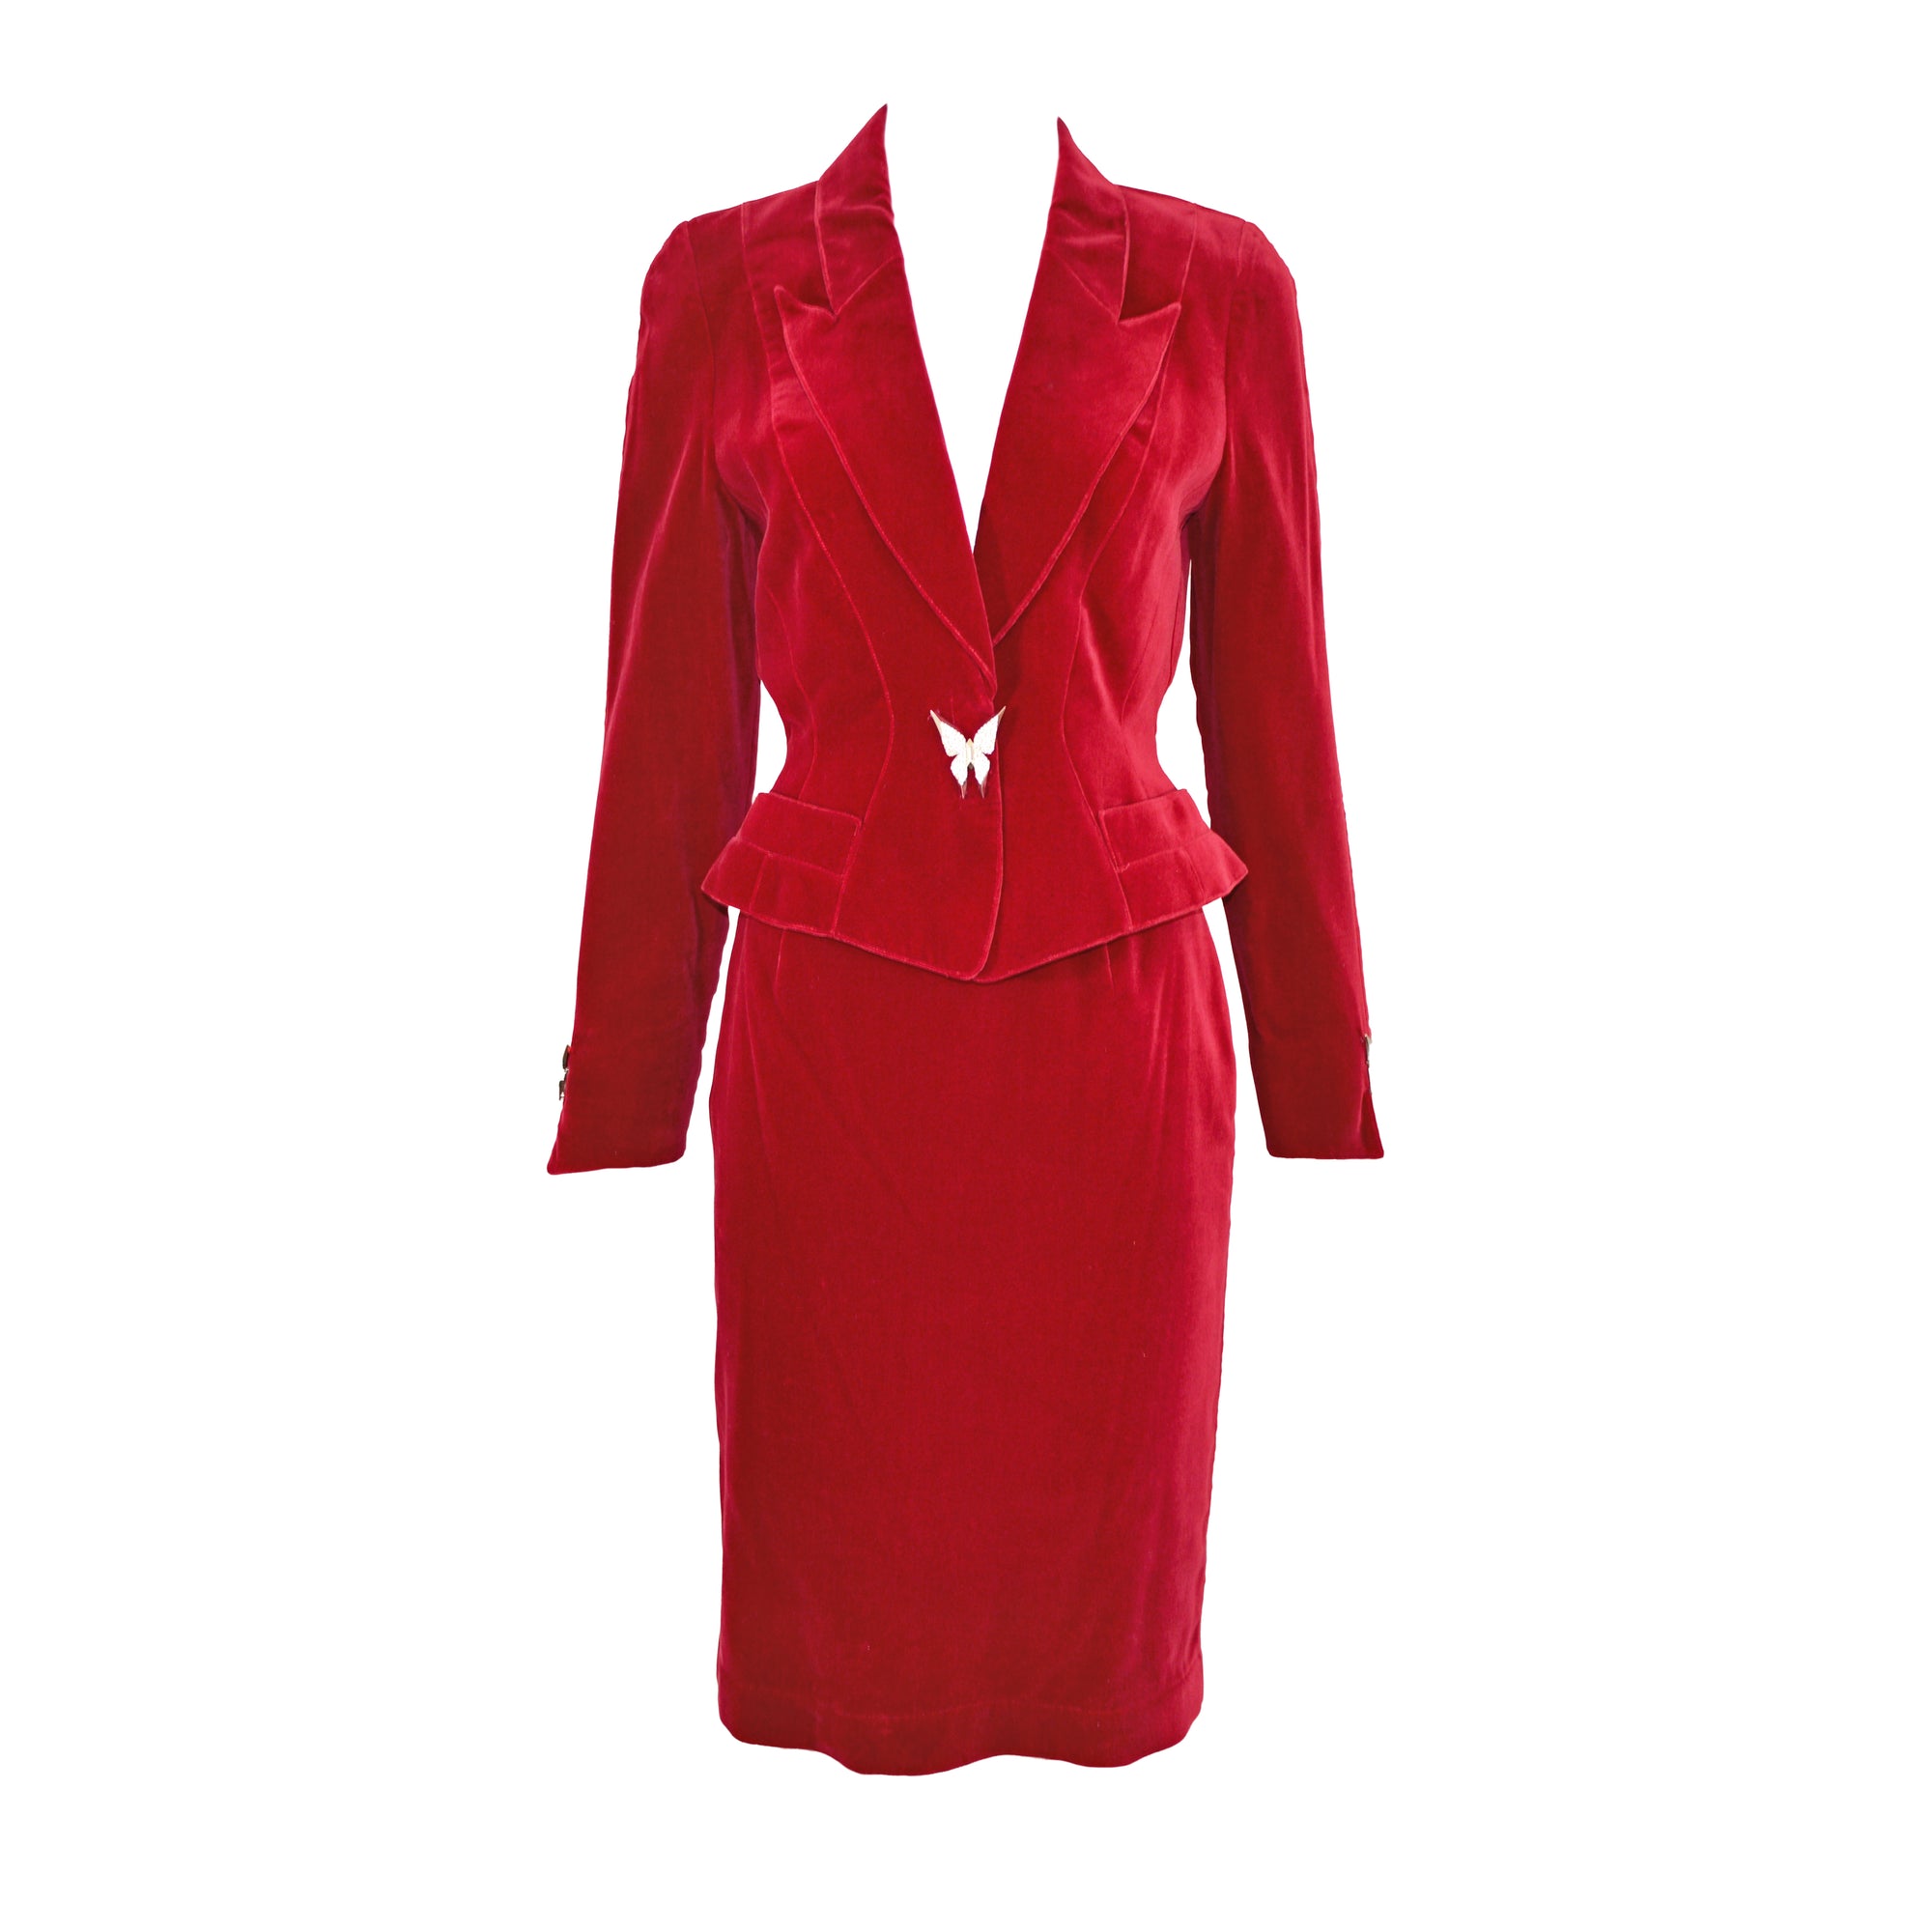 Thierry Mugler Velvet Skirt Suit with Butterfly Accents